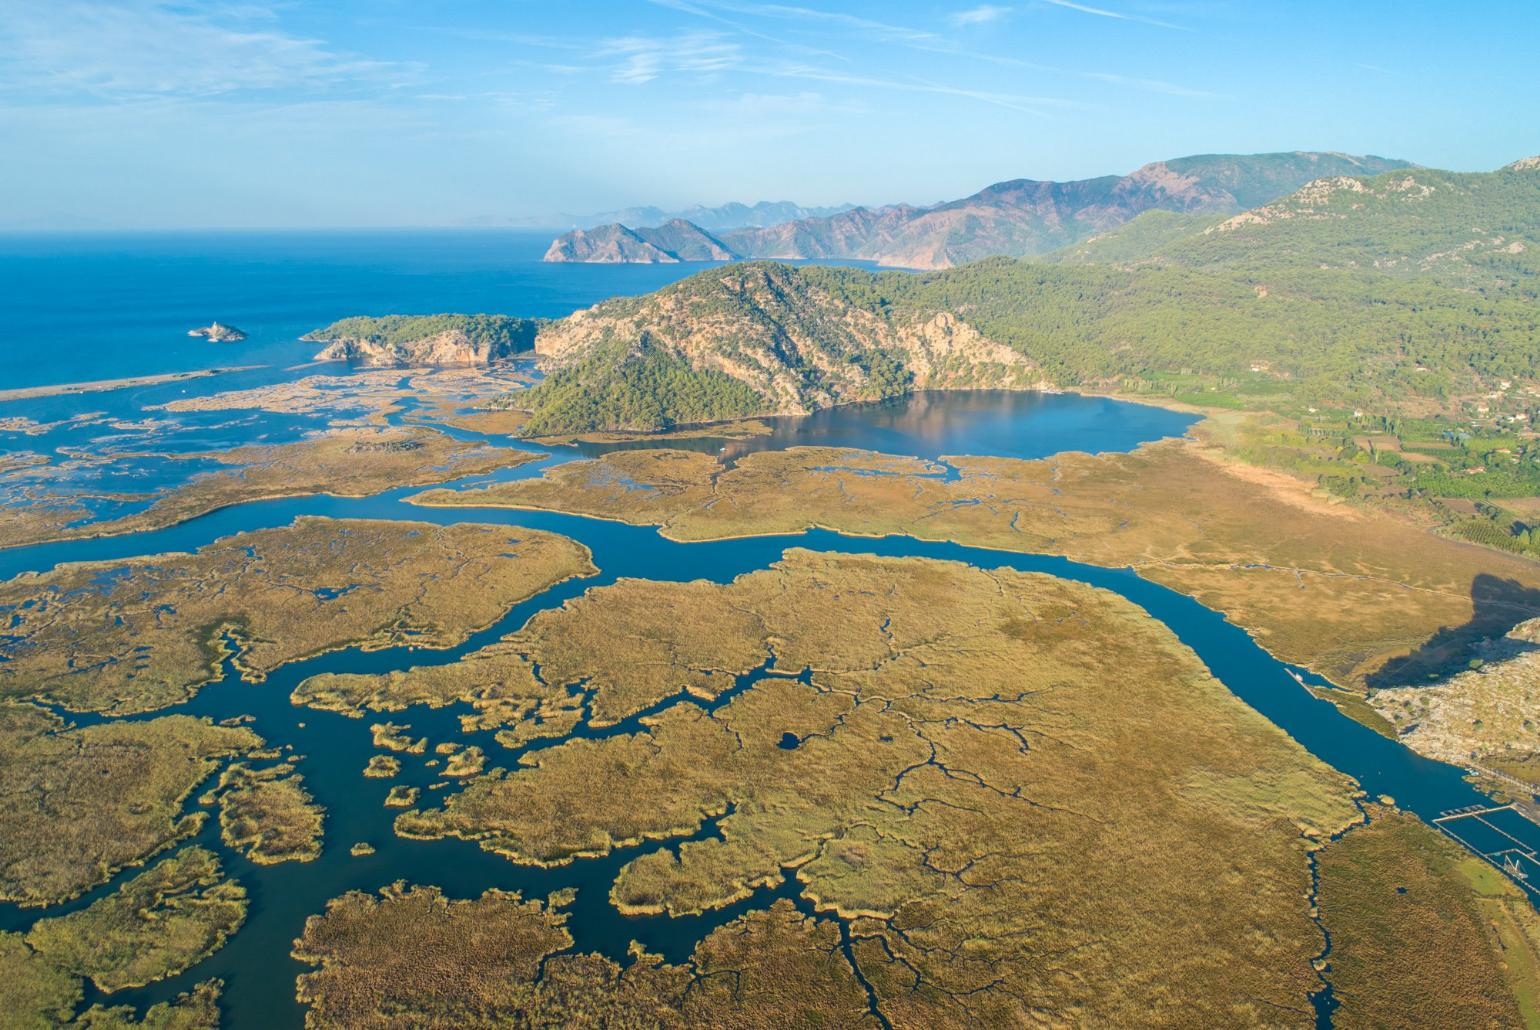 Aerial view of Dalyan canal